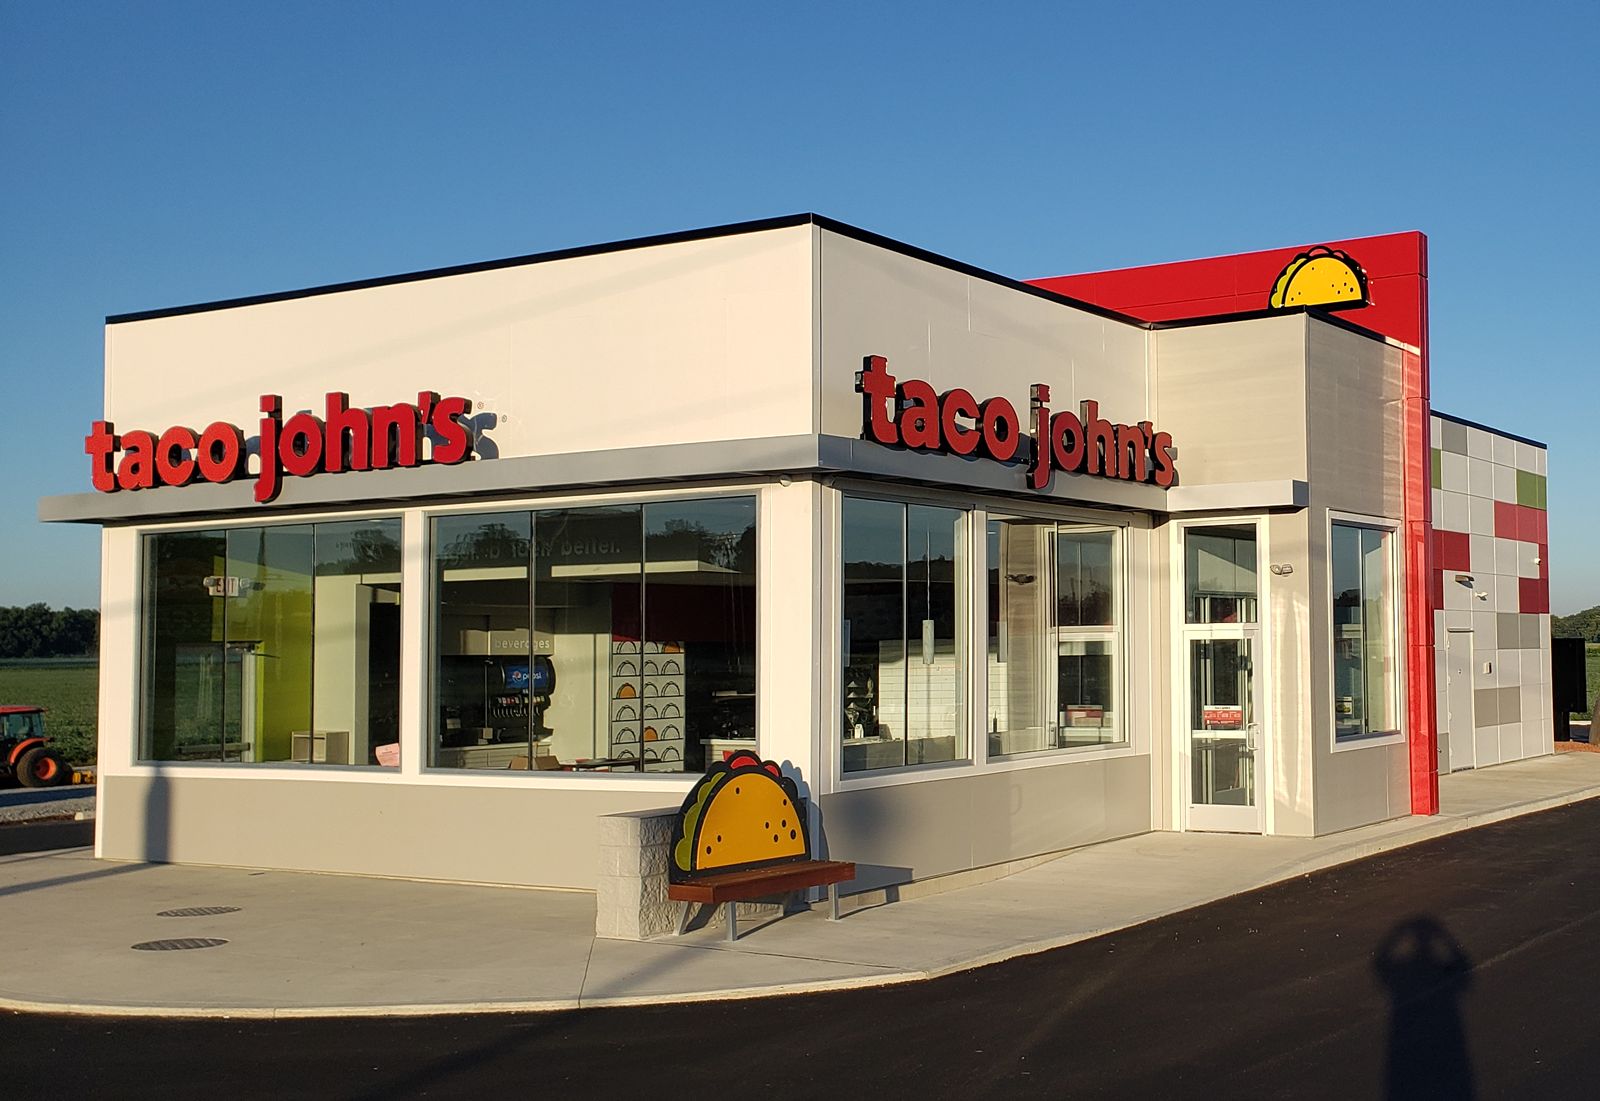 Taco John's Seeks Over 6,000 Team Members Following Impressive Sales and Growth